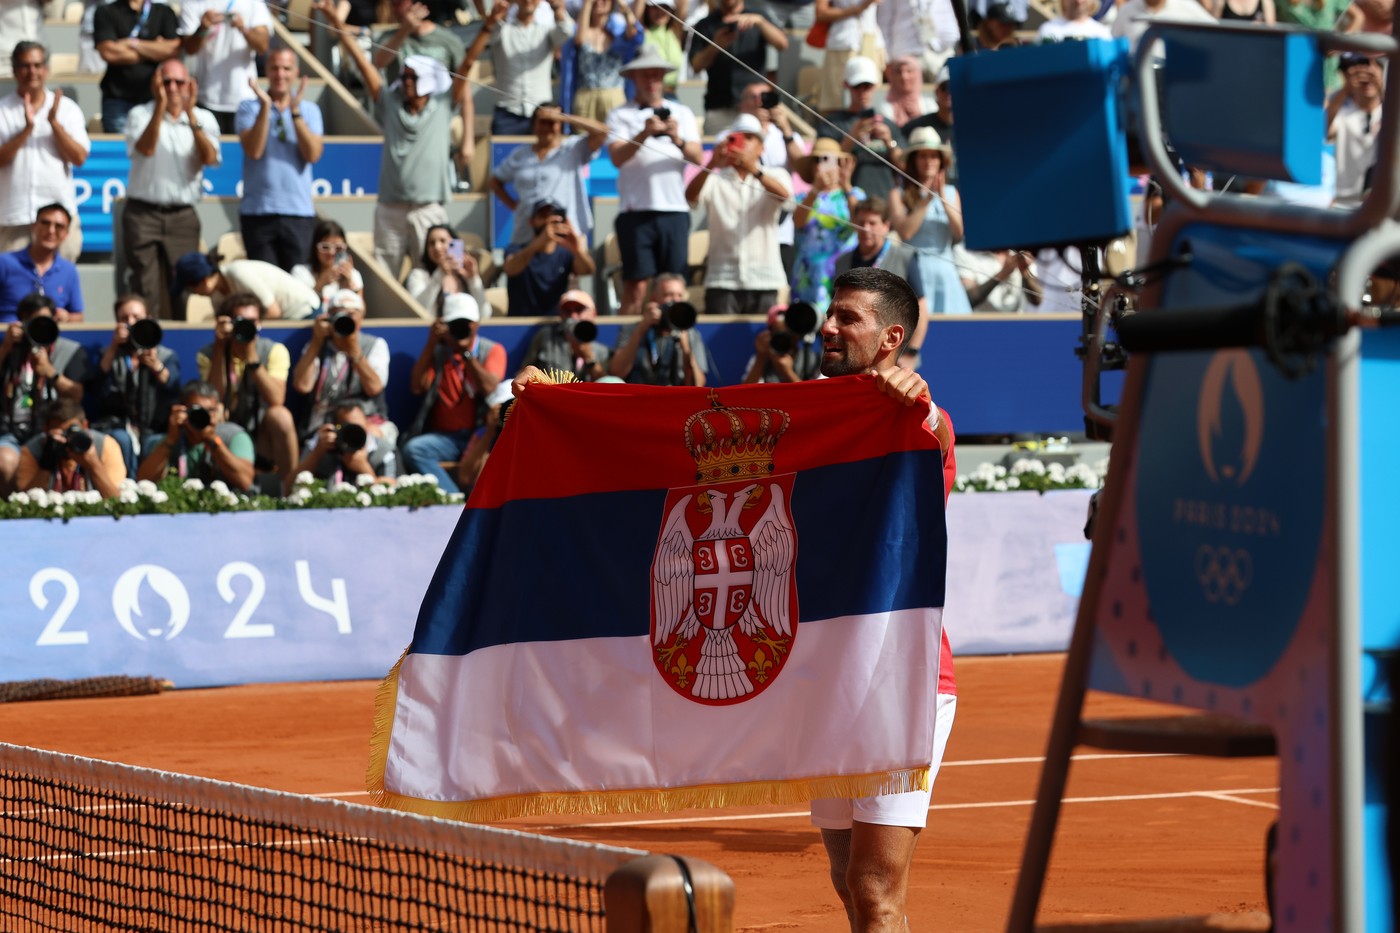 NOVAK DJOKOVIC of Serbia reacts to defeating CARLOS ALCARAZ of Spain, thus grabbing his elusive gold medal in the Tennis Men's Singles final at the Paris 2024 Olympic Games in Roland-Garros, France
Paris 2024: Tennis, Ile-De-France, France - 04 Aug 2024,Image: 895907113, License: Rights-managed, Restrictions: , Model Release: no